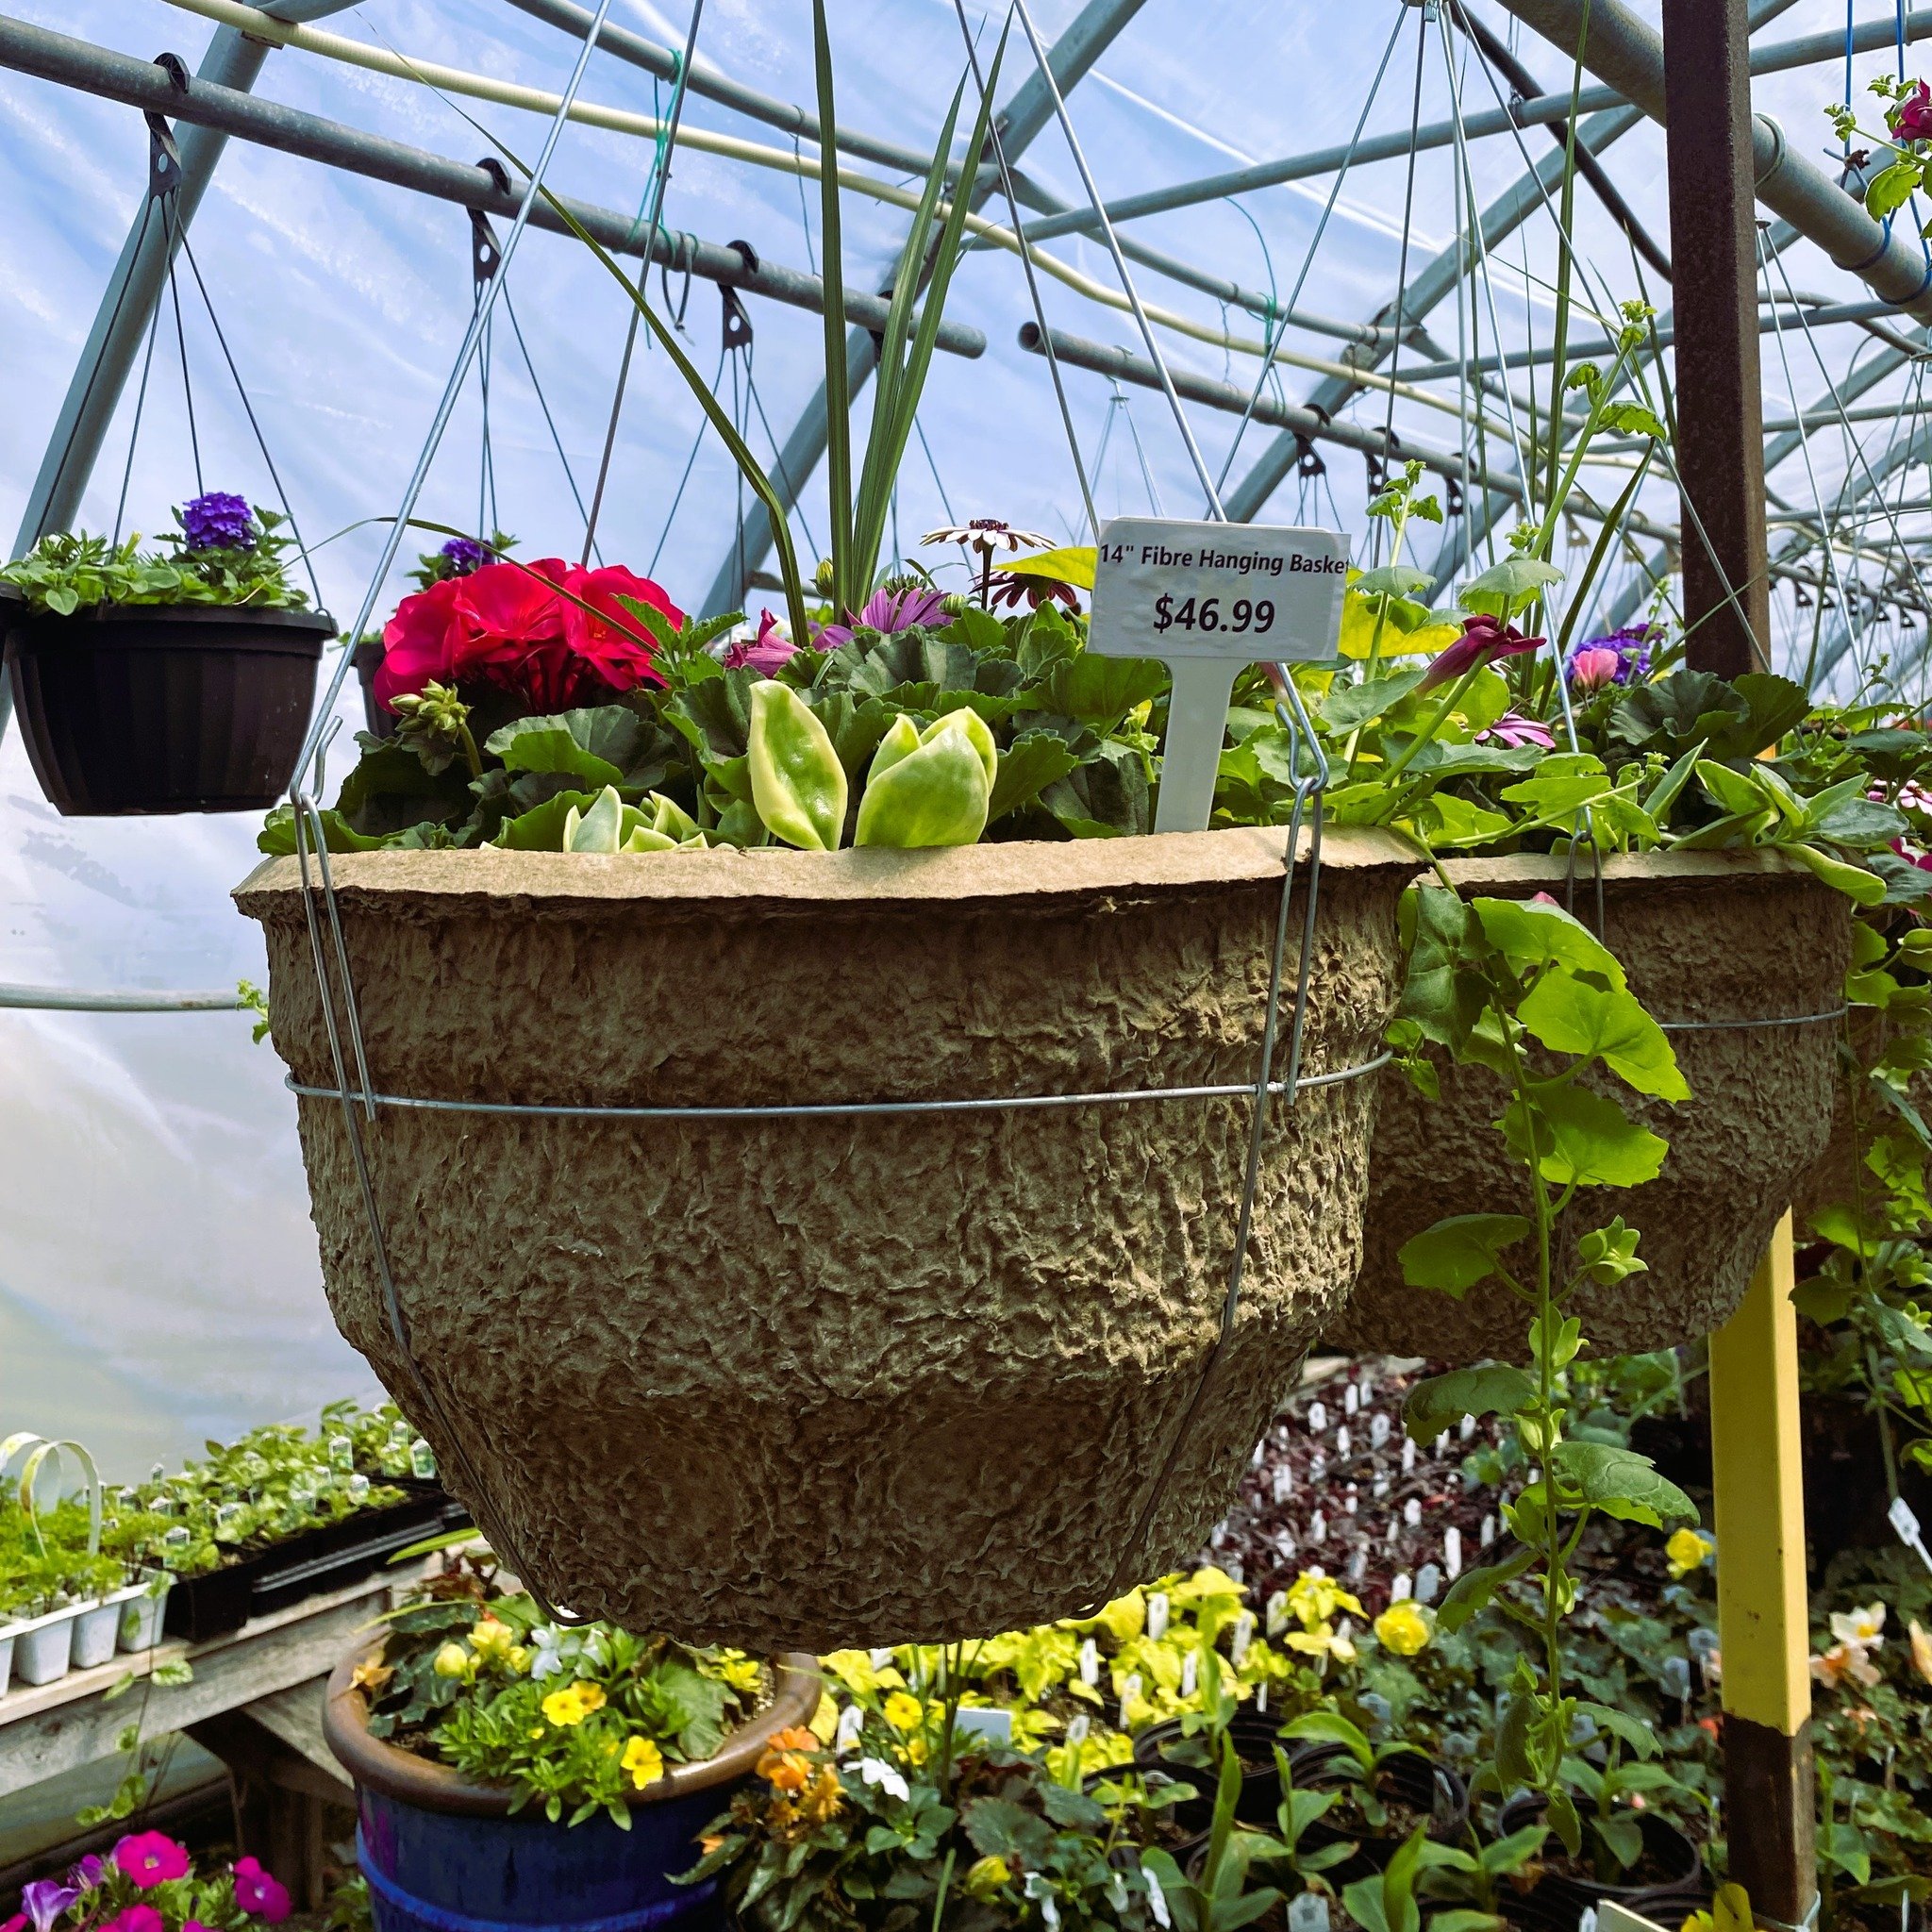 🌸 Spoil Mom with Blooms! 🌿 Elevate her Mother's Day with our stunning hanging baskets starting at just $22.99. 🎁 Gift her the joy of blossoms that last!